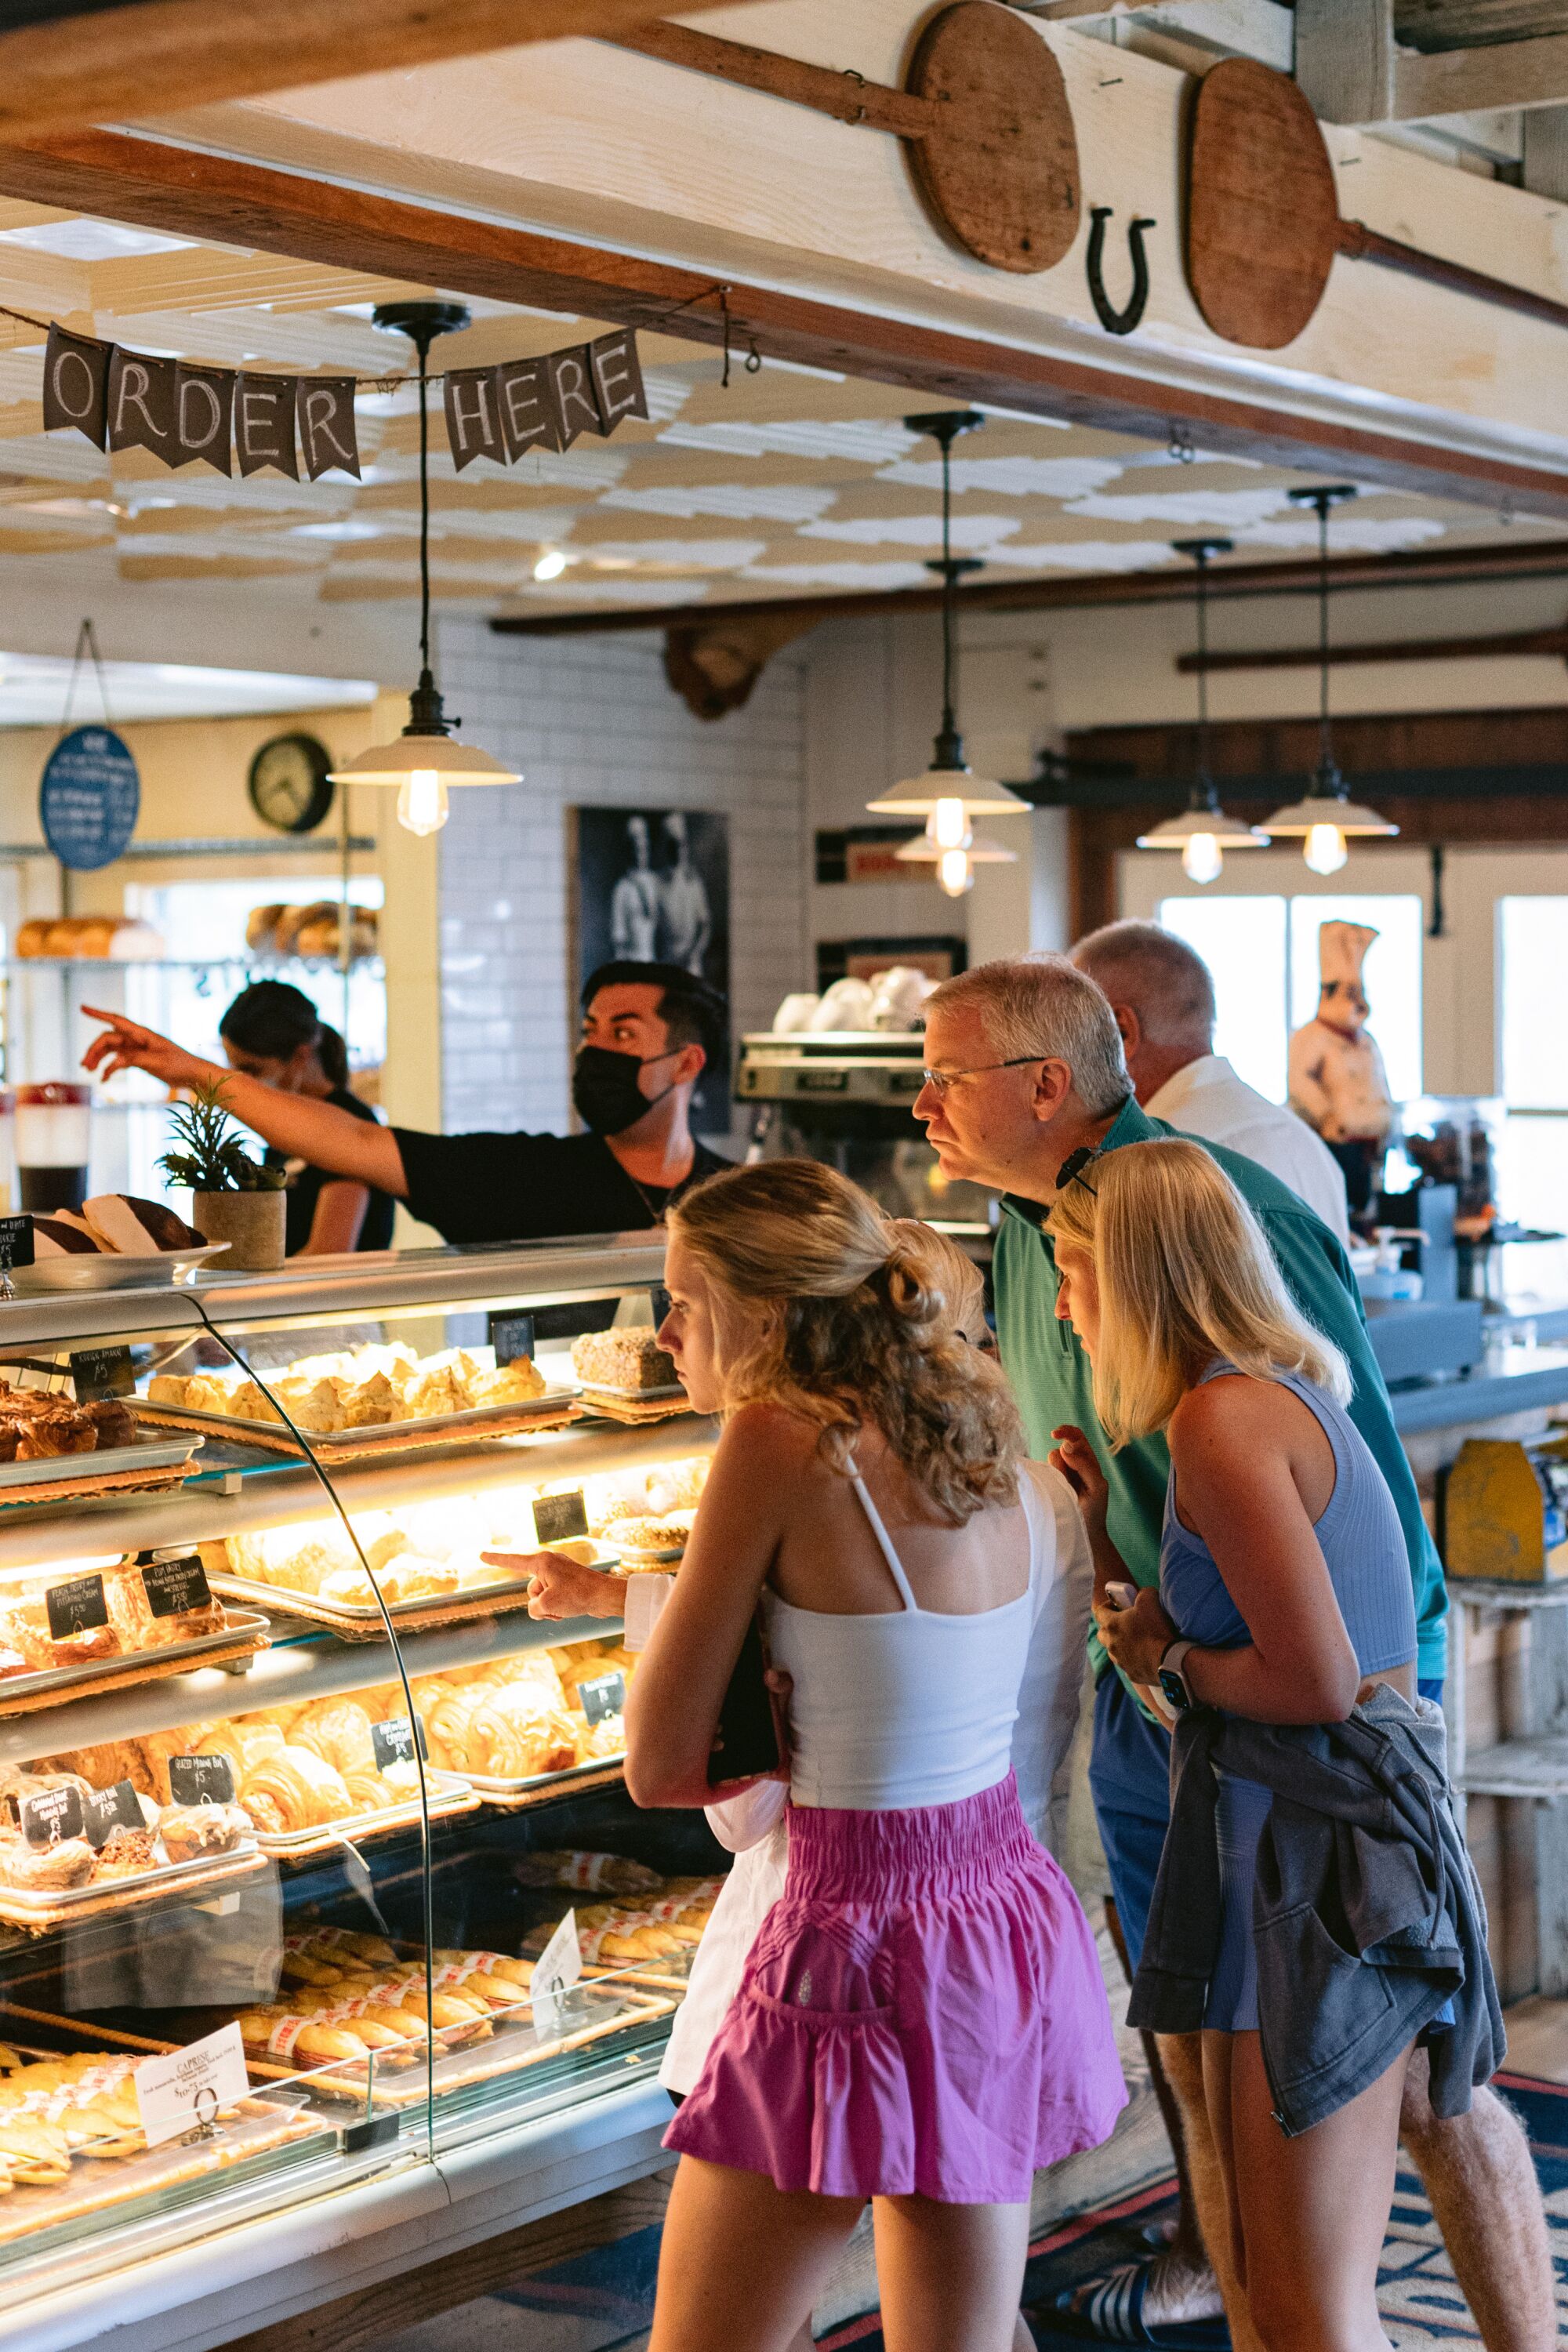 People standing in front of a bakery display, craning necks to see what's inside, in a bakery.